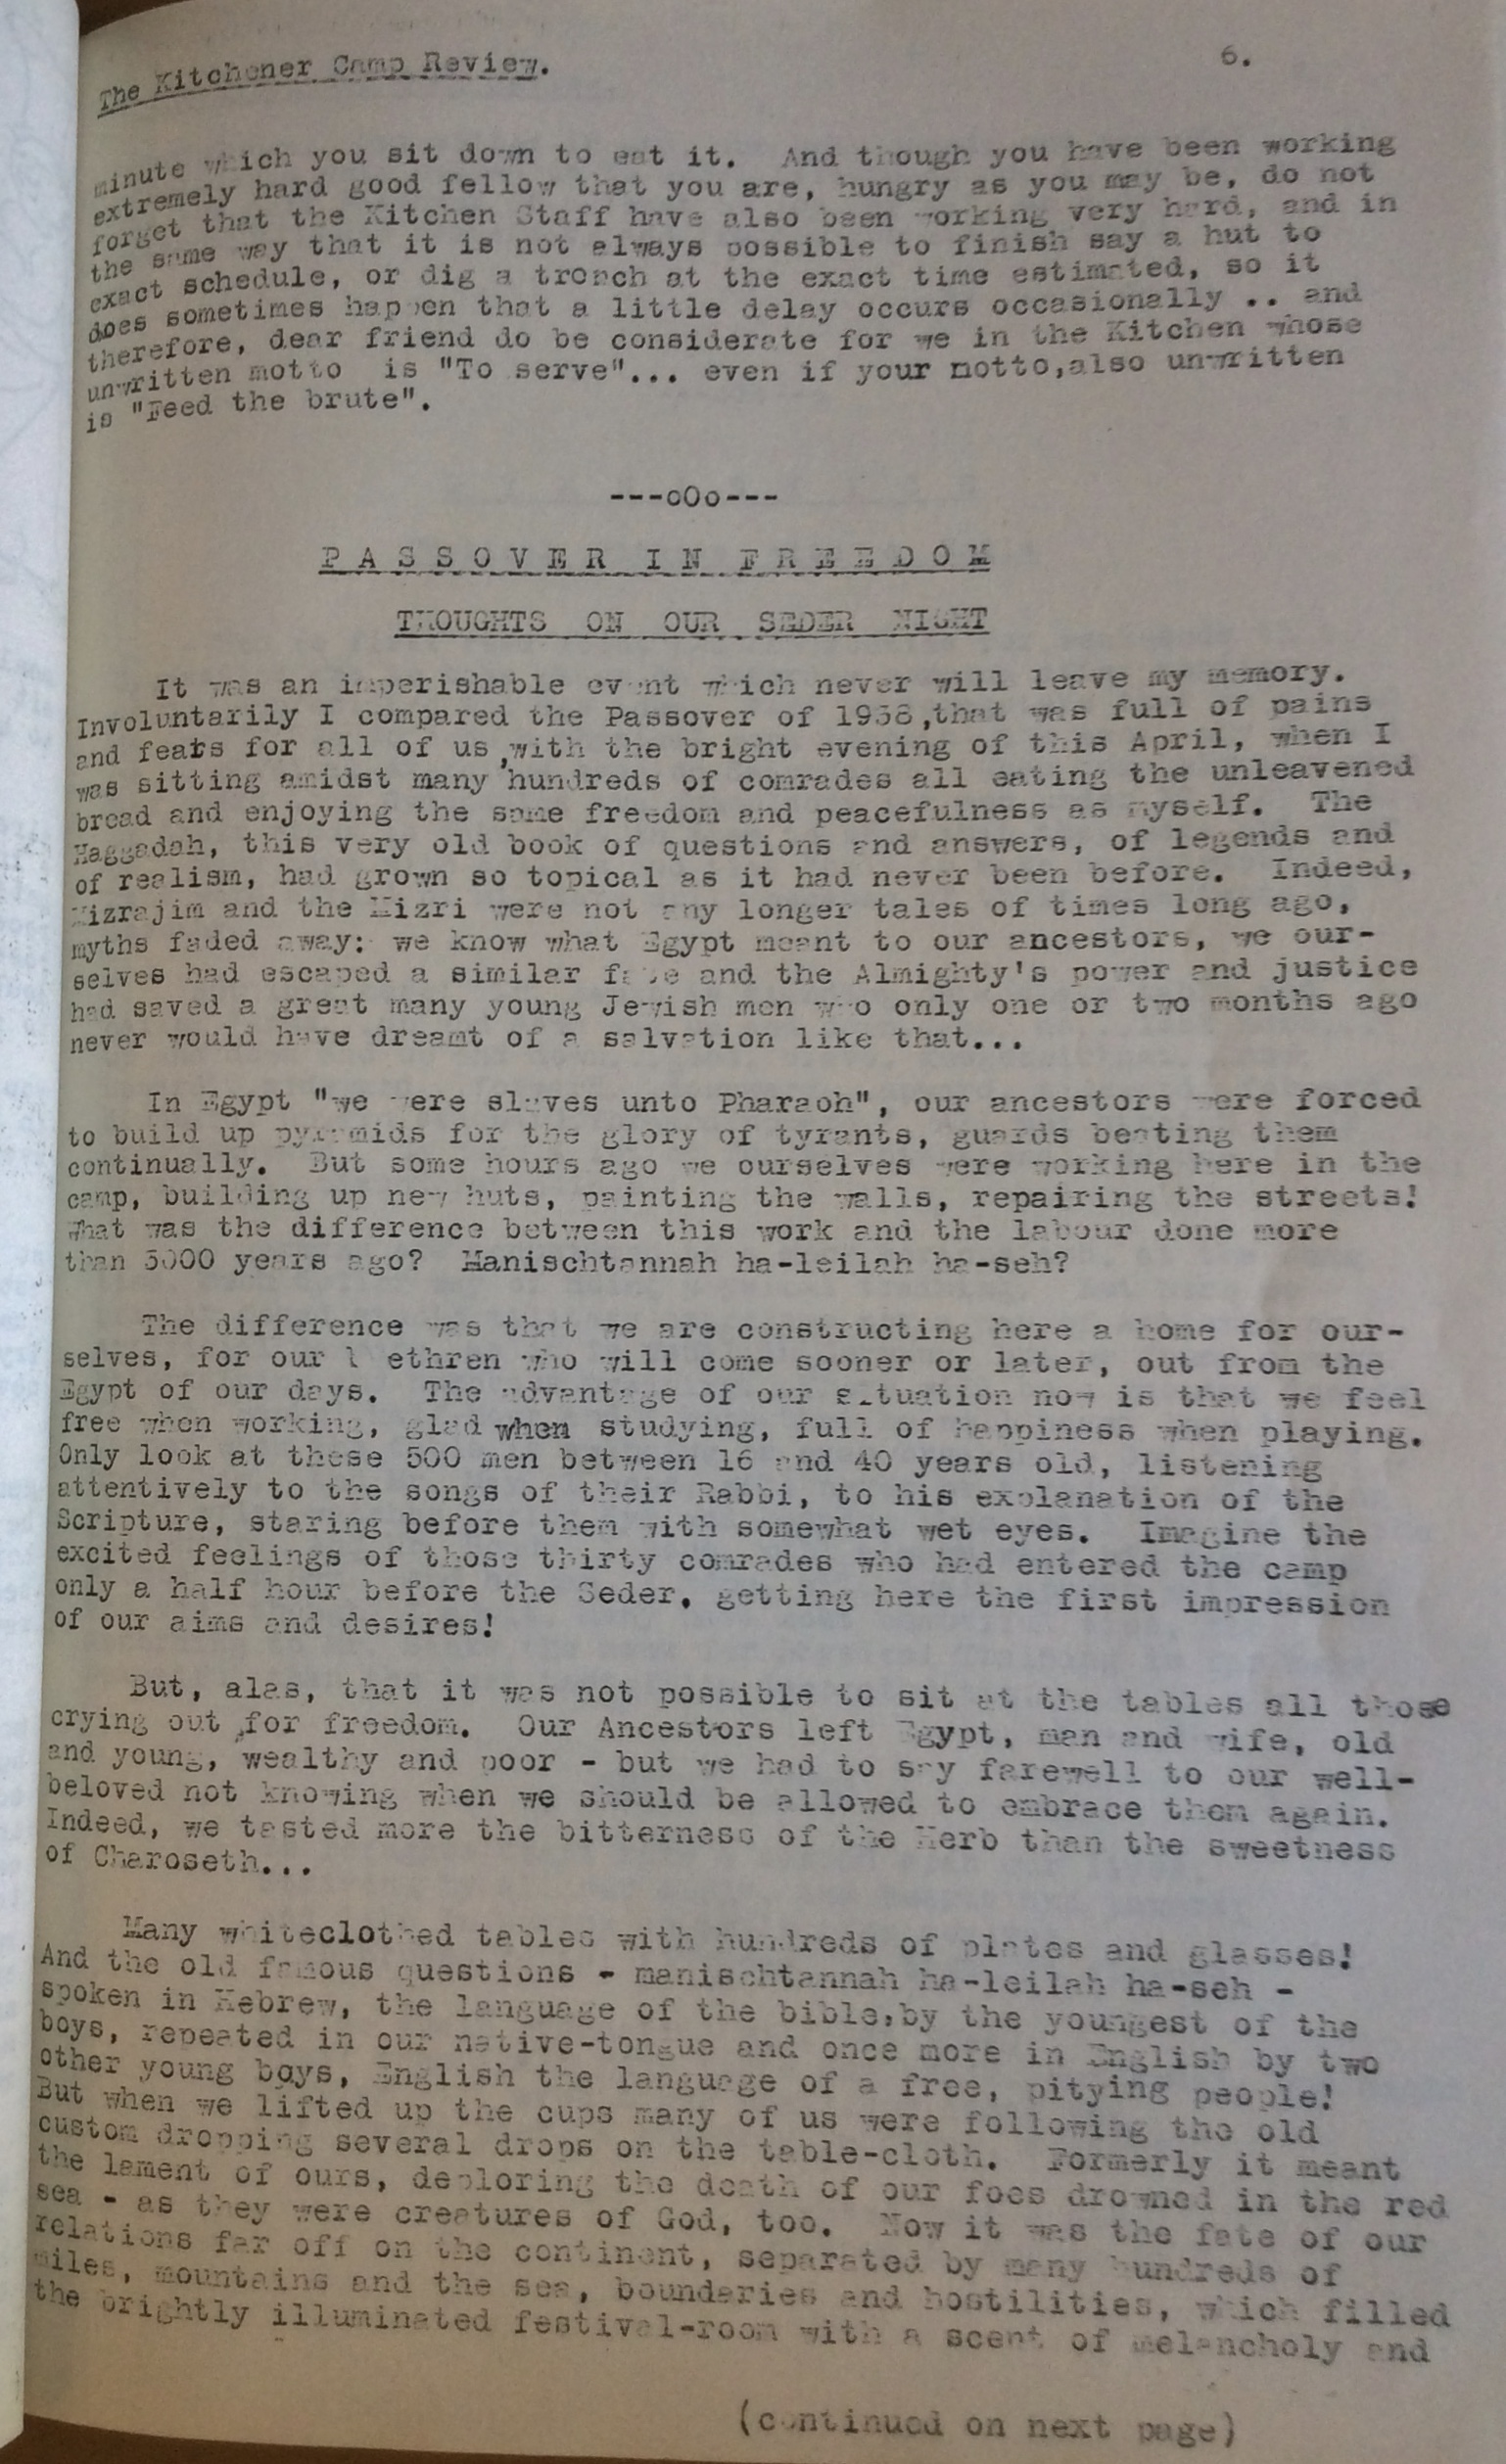 Kitchener Camp Review, May 1939, page 6